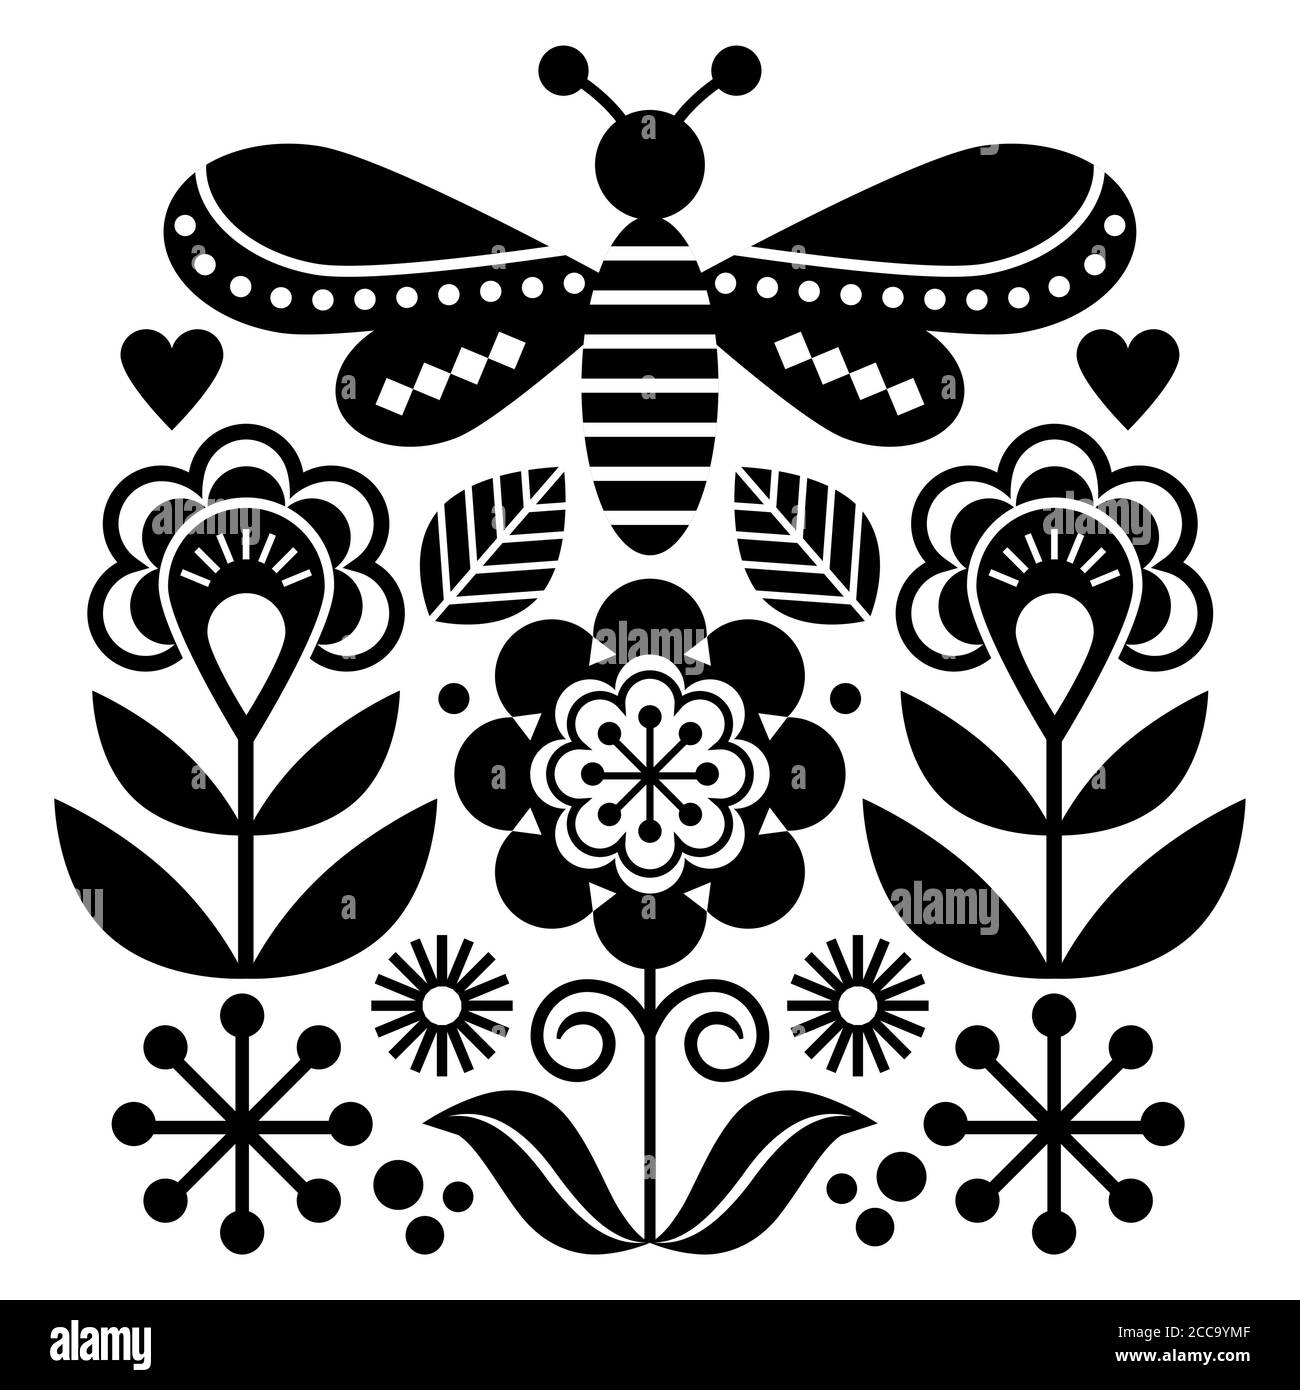 Scandinavian folk art style flowers and insect vector design, cute graden floral pattern with fly inspired by traditional embroidery from Sweden, Norw Stock Vector